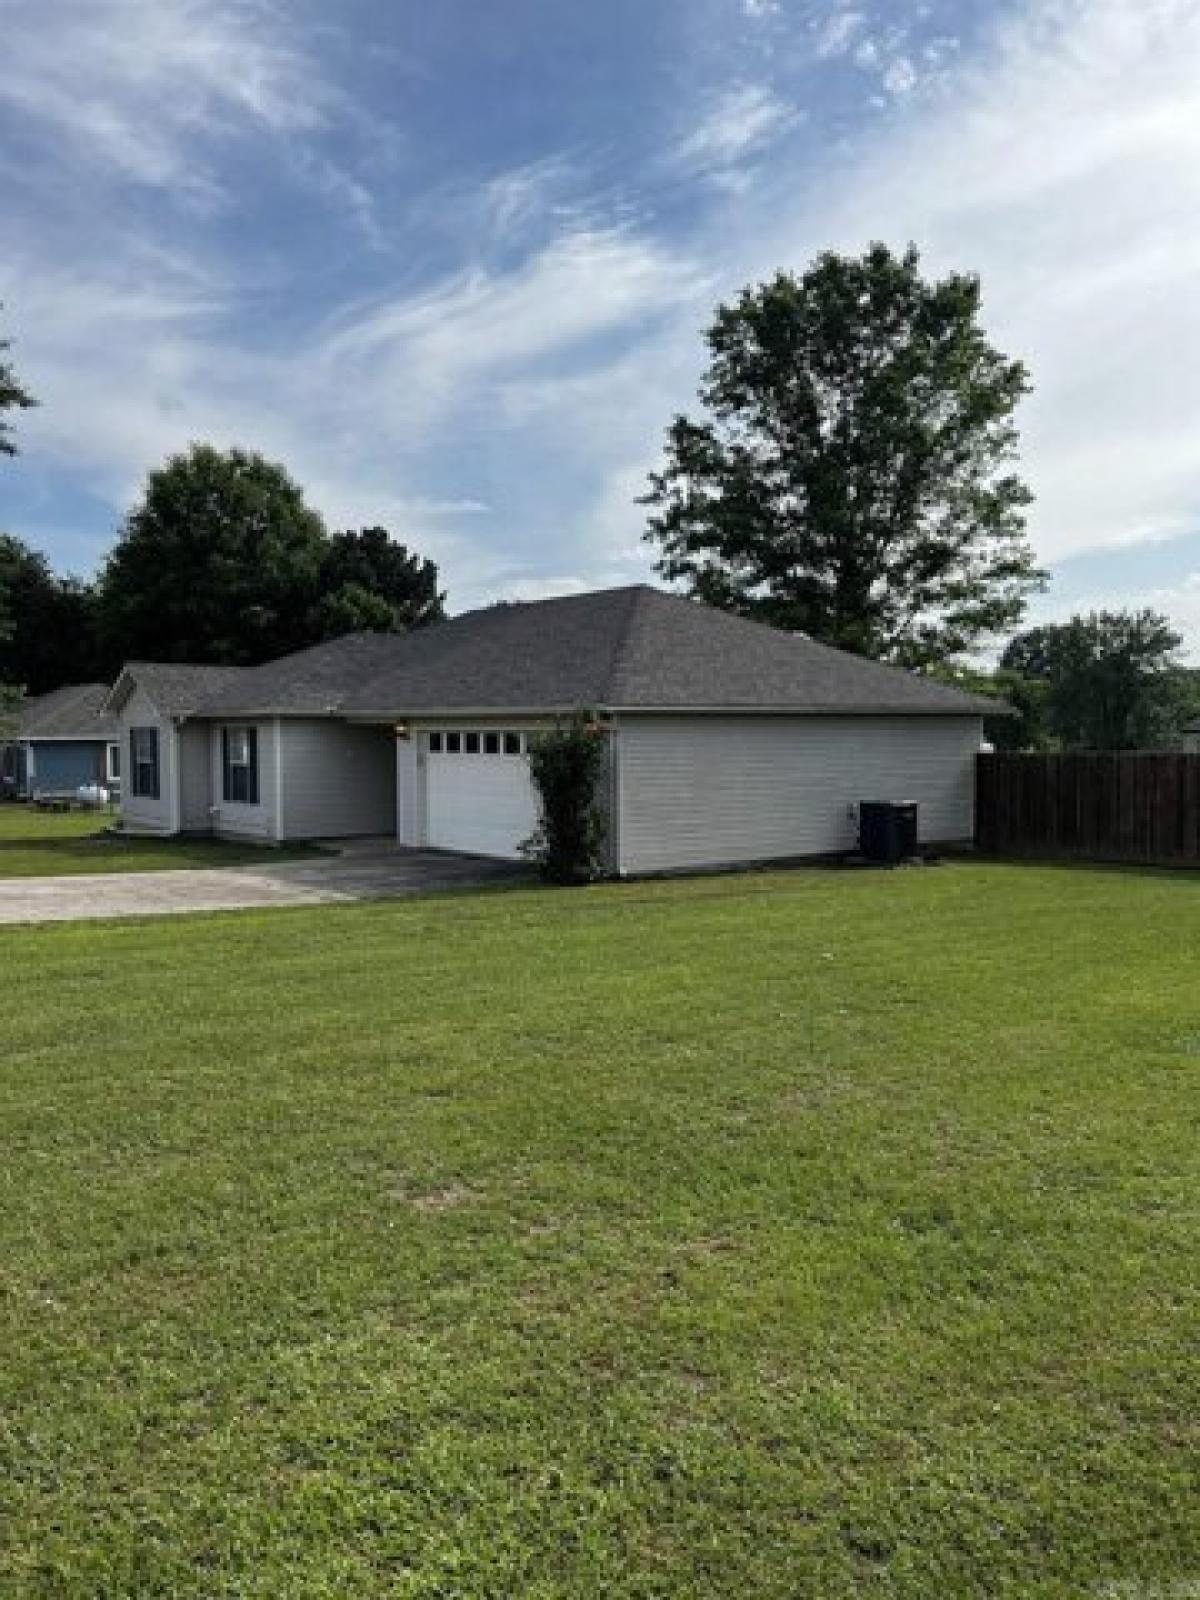 Picture of Home For Sale in Lonoke, Arkansas, United States